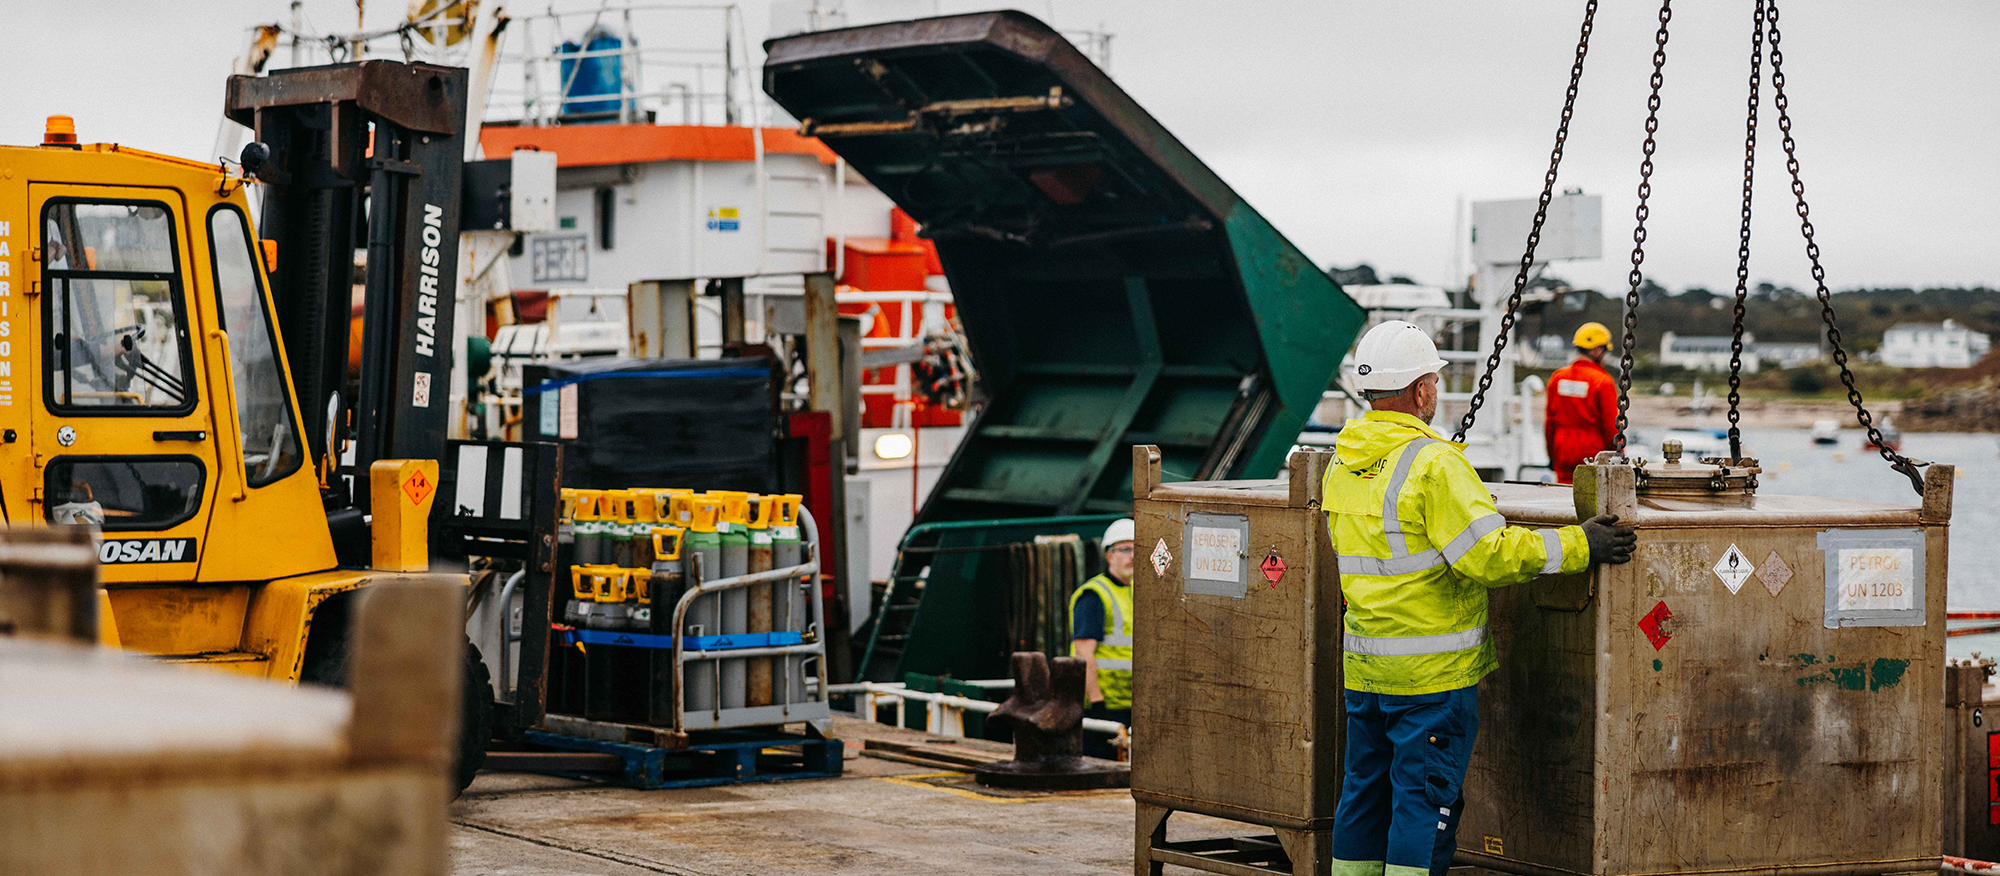 Loading the Gry Maritha at St Mary's Quay, Isles of Scilly